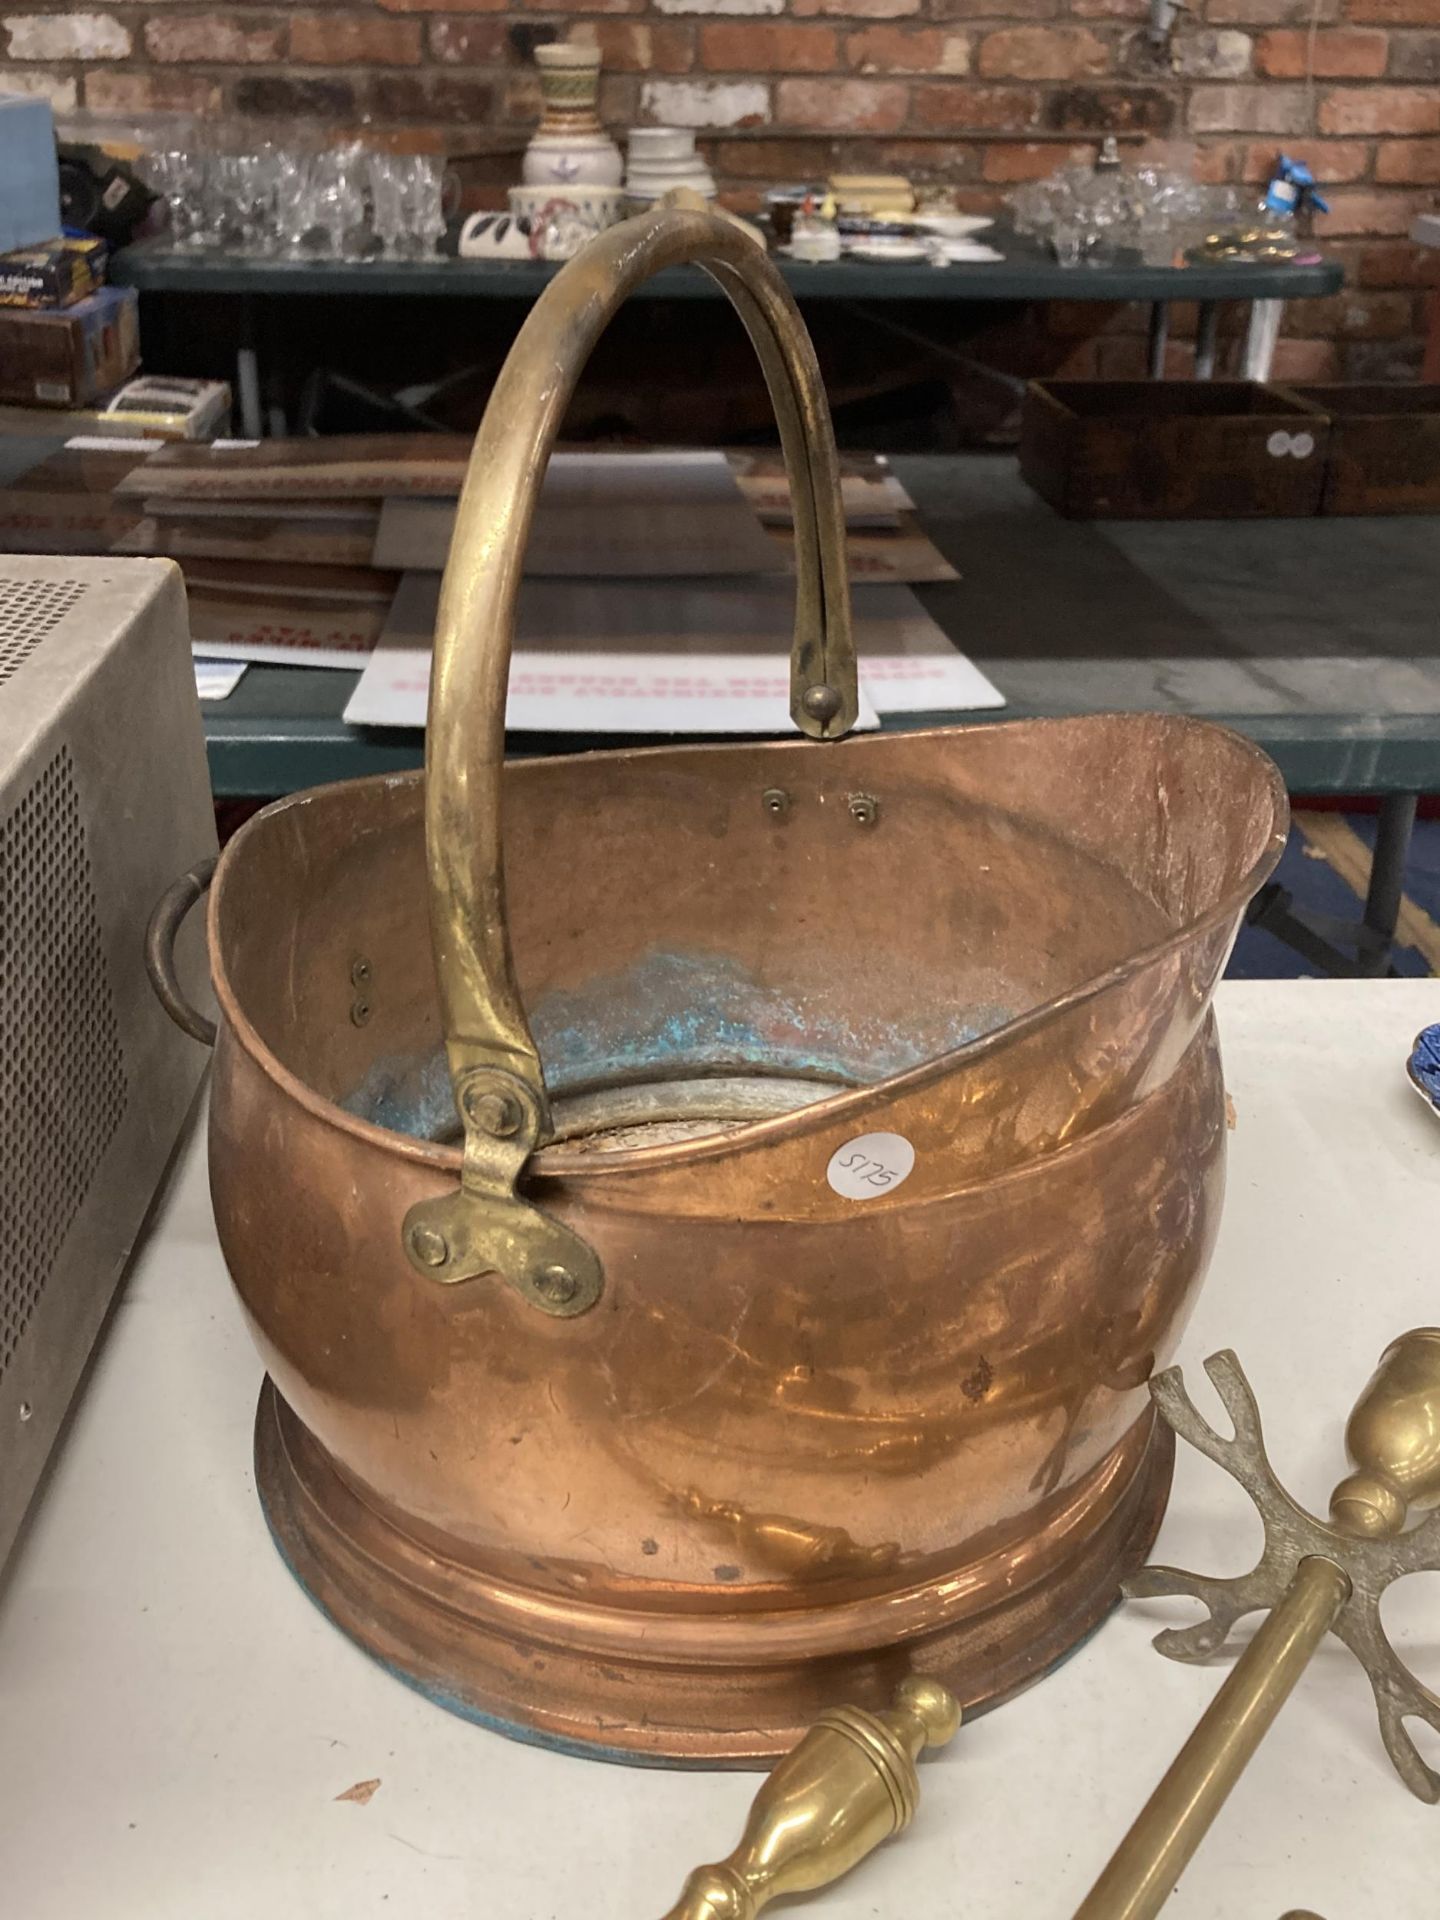 A COPPER COAL SCUTTLE WITH BRASS HANDLE PLUS A BRASS COMPANION SET - Image 2 of 3